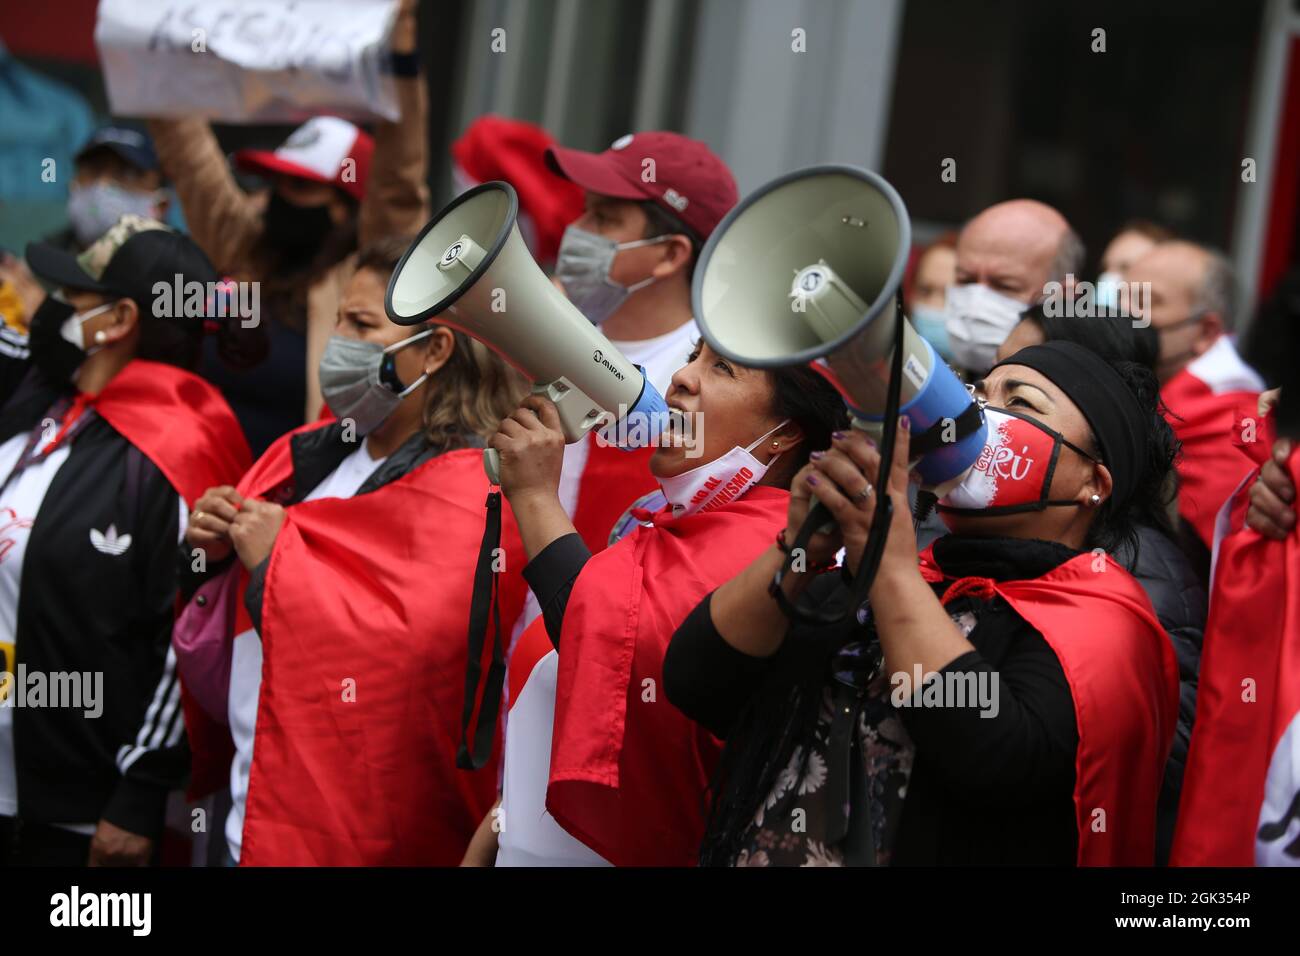 Lima, Peru. 12th Sep, 2021. Women cheer the death of Peruvian guerrilla leader Guzman with their megaphones. The former leader of the Peruvian guerrilla organization Shining Path (Sendero Luminoso) is dead. Abimael Guzmán died at the age of 86 in a maximum security prison, the prison administration announced on Saturday (11/09/2021). Almost 70,000 people were killed in clashes between the Sendero Luminoso and state security forces between 1980 and 2000. Credit: Cesar Lanfranco/dpa/Alamy Live News Stock Photo